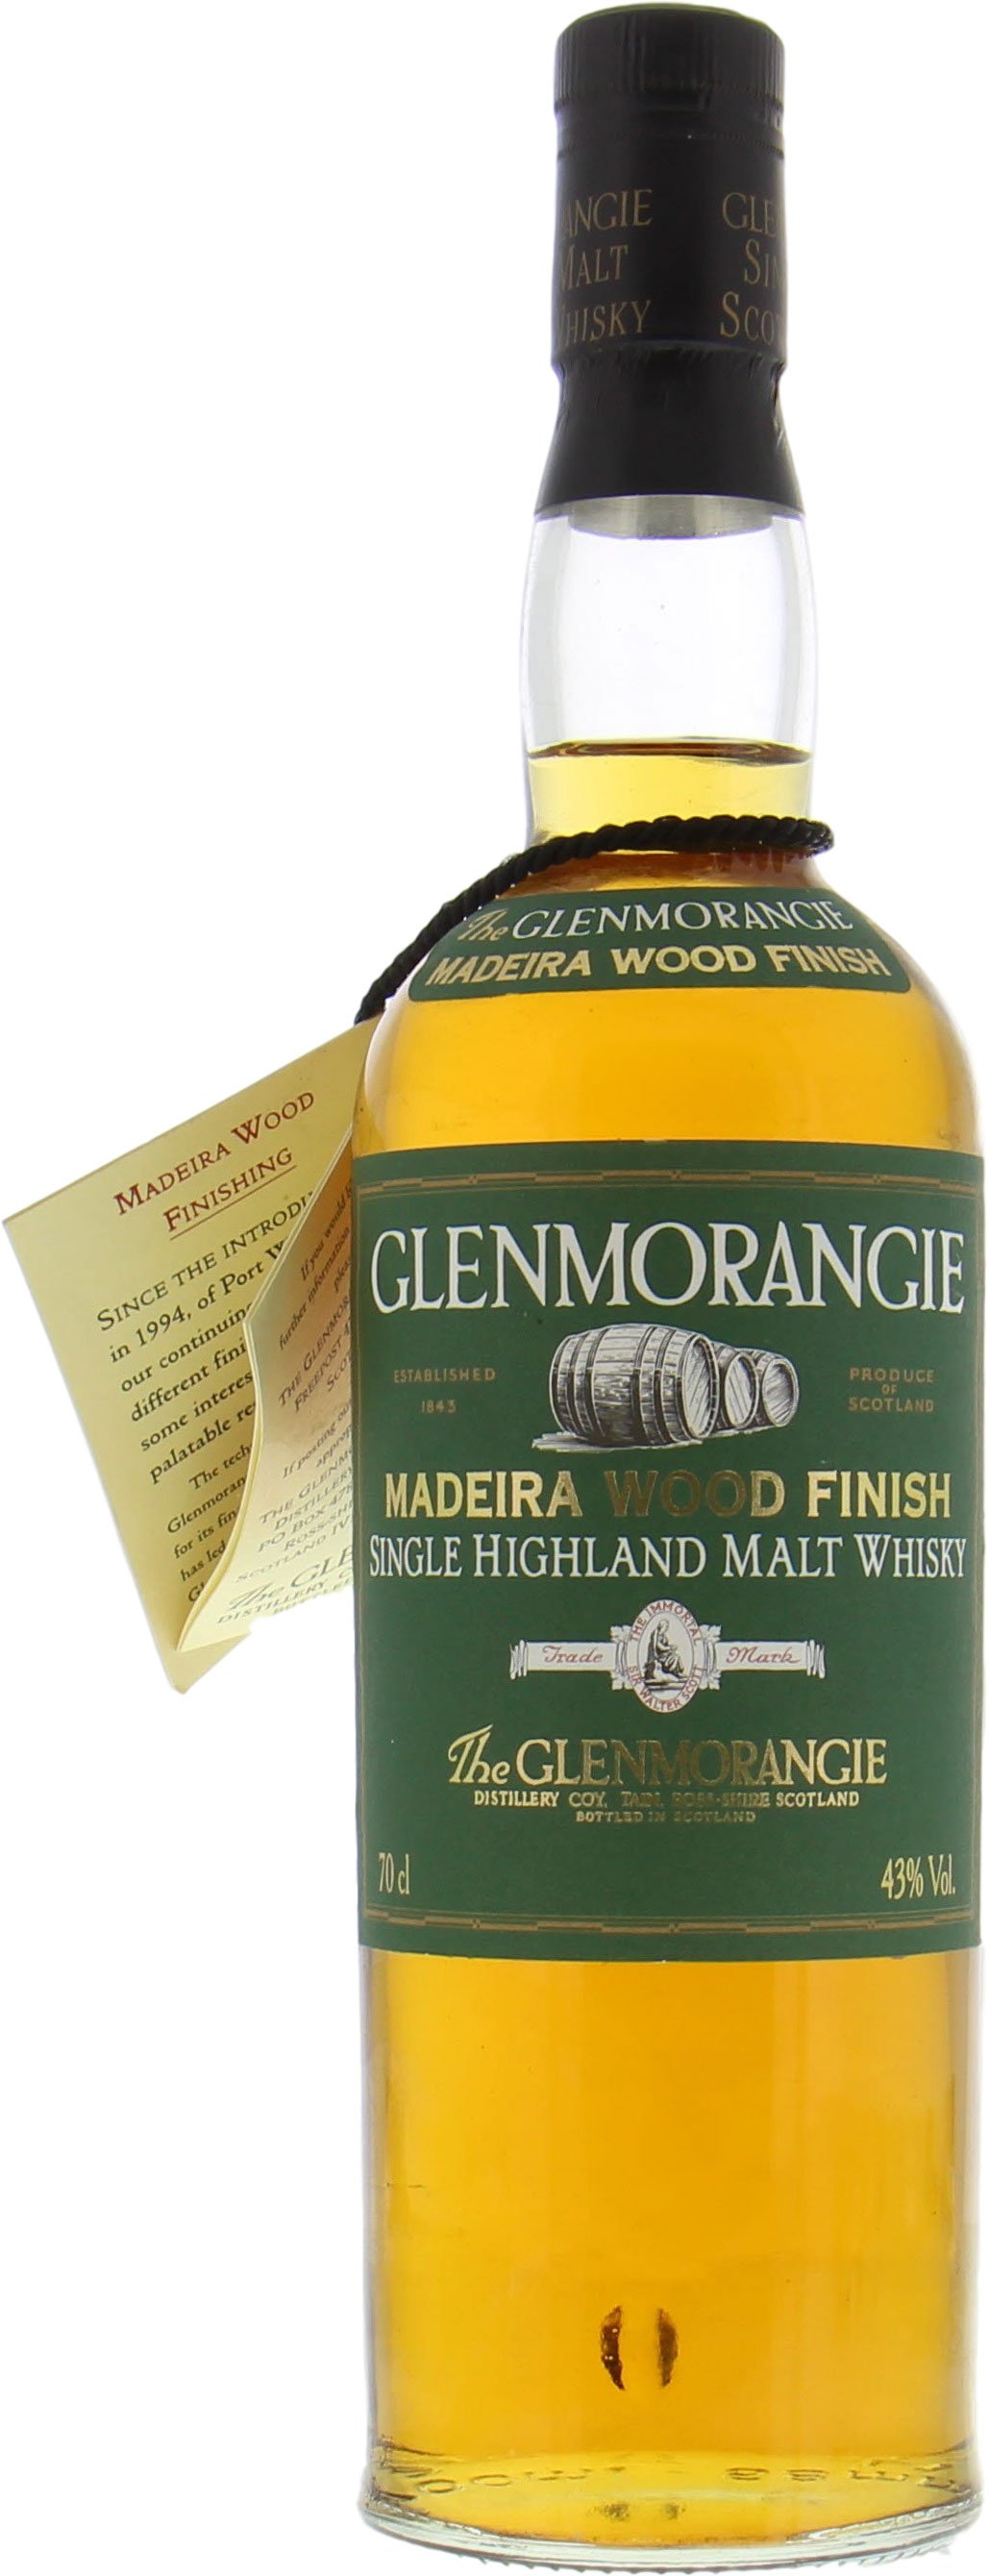 Glenmorangie - Madeira Wood Finish Old Plain (Green) Label 43% nv No Original Container Included